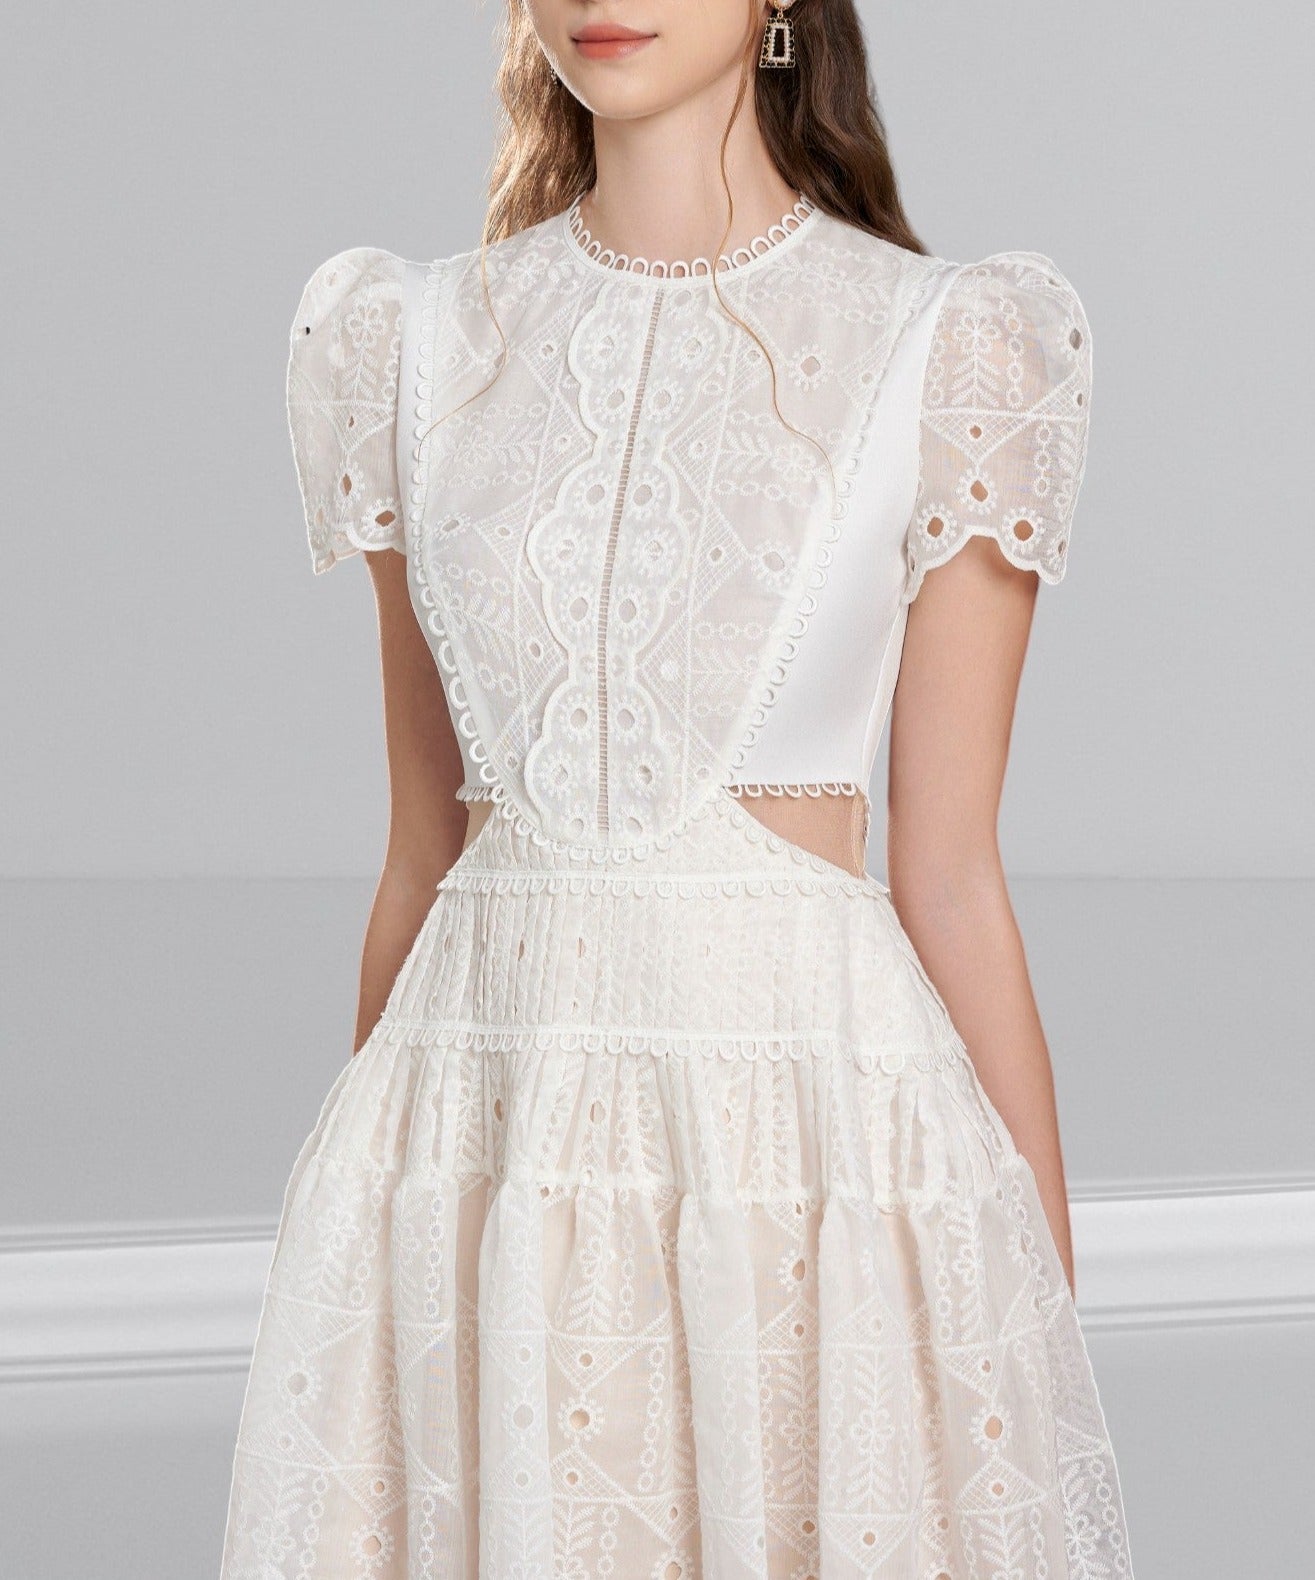 White Lace Long Dress Embroidery O-neck Hollow Out Waist  | REBECCA WARDROBE